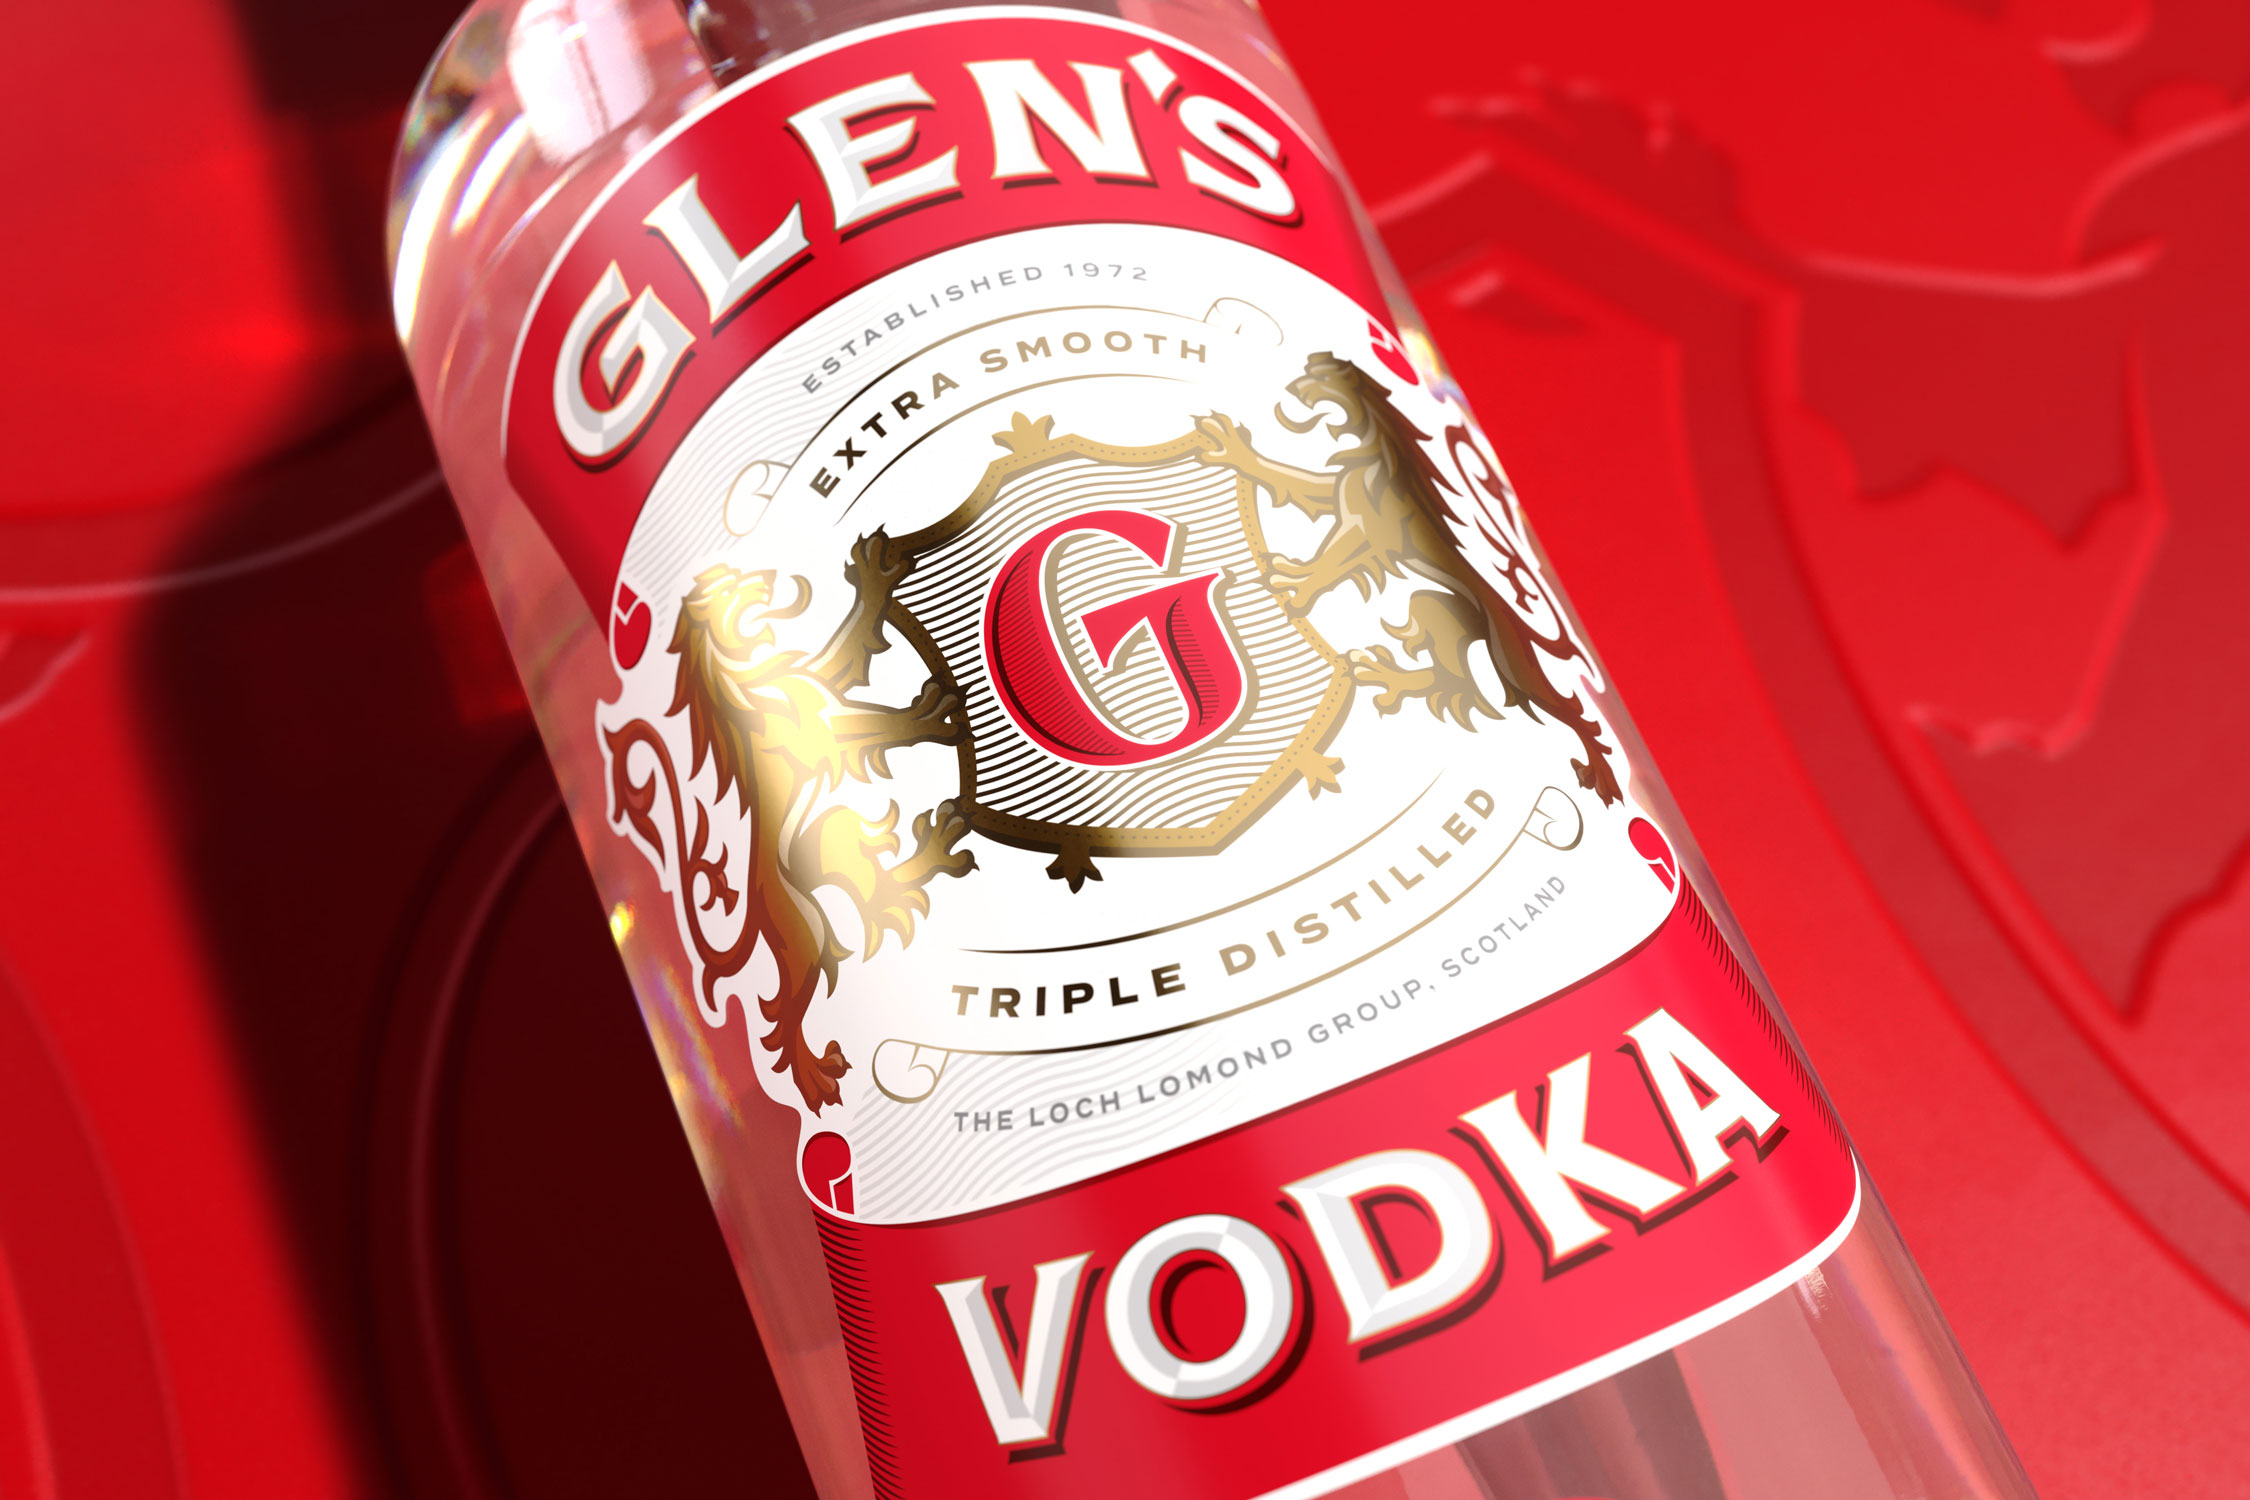 Creative Agency Thirst Adds A Sip Of Scottish Spirit To Glen’s Vodka As Brand Targets Growth And Fresh Consumer Appeal